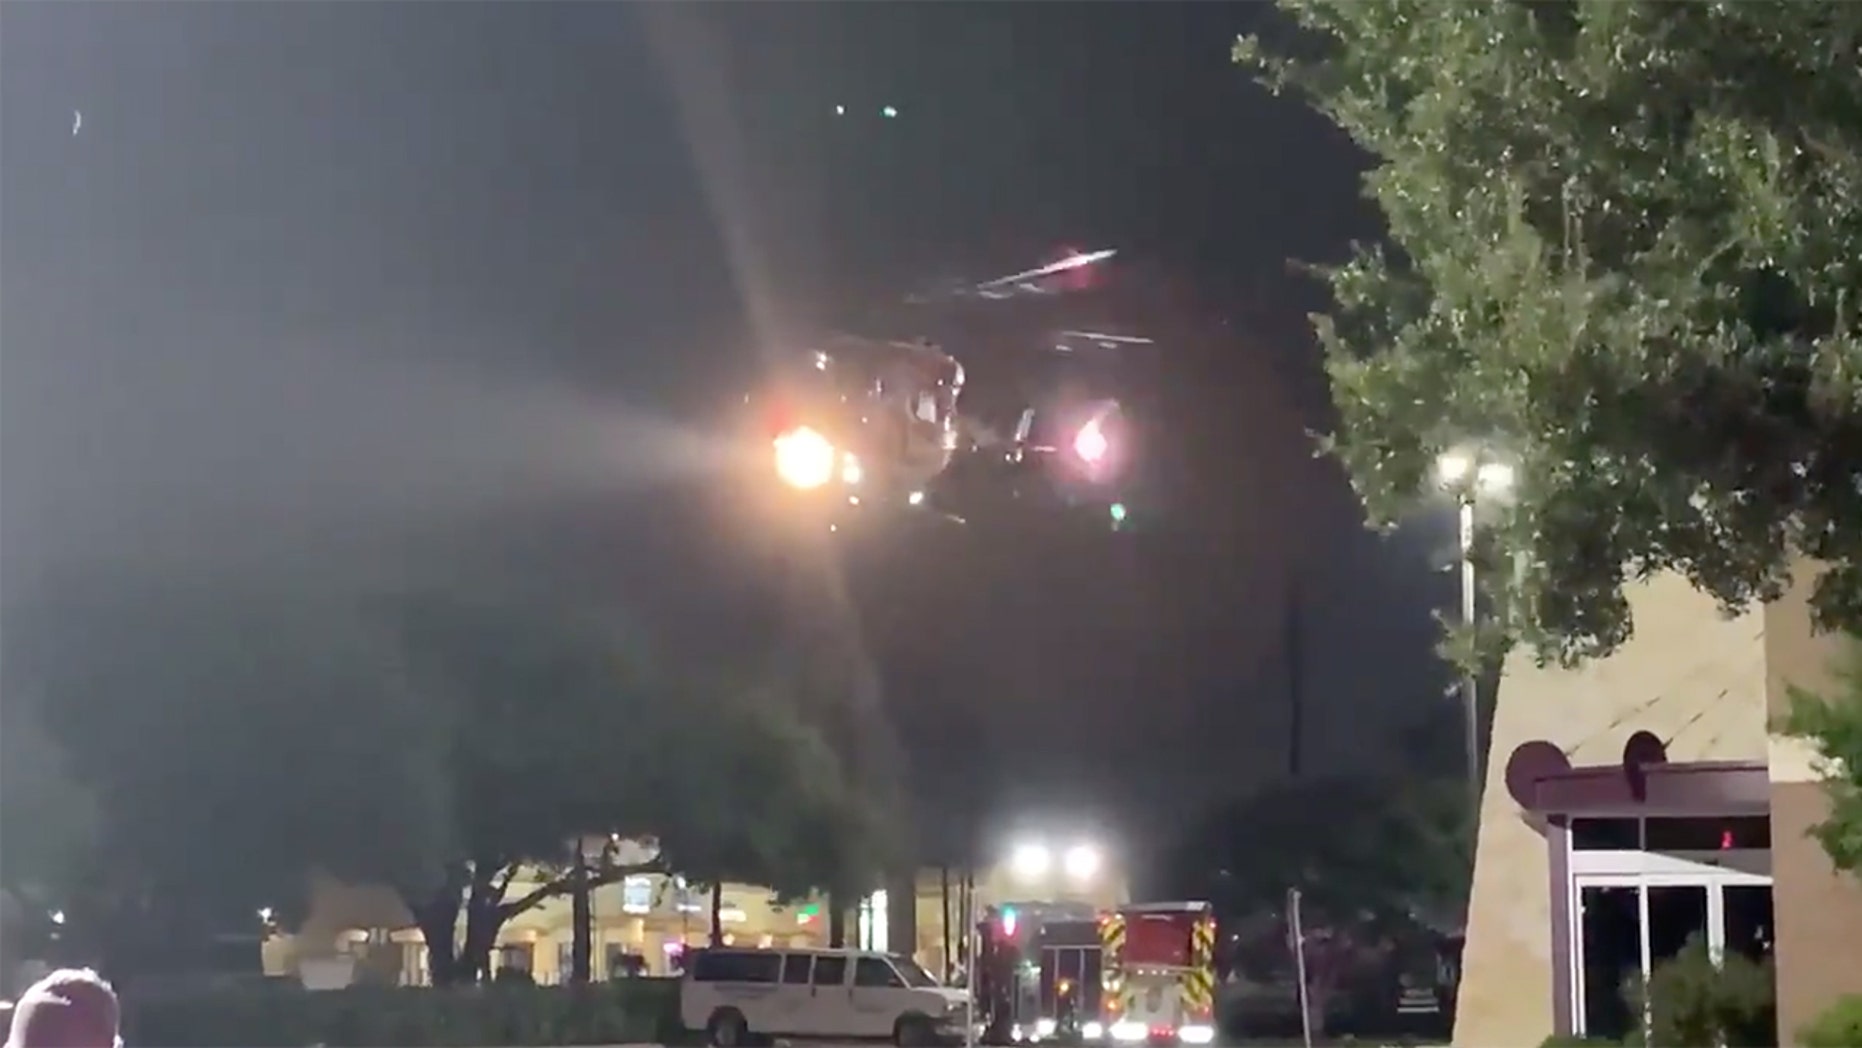 Screen image from video showing groom being airlifted to the hospital after being shot in the chest on his wedding day in Texas.